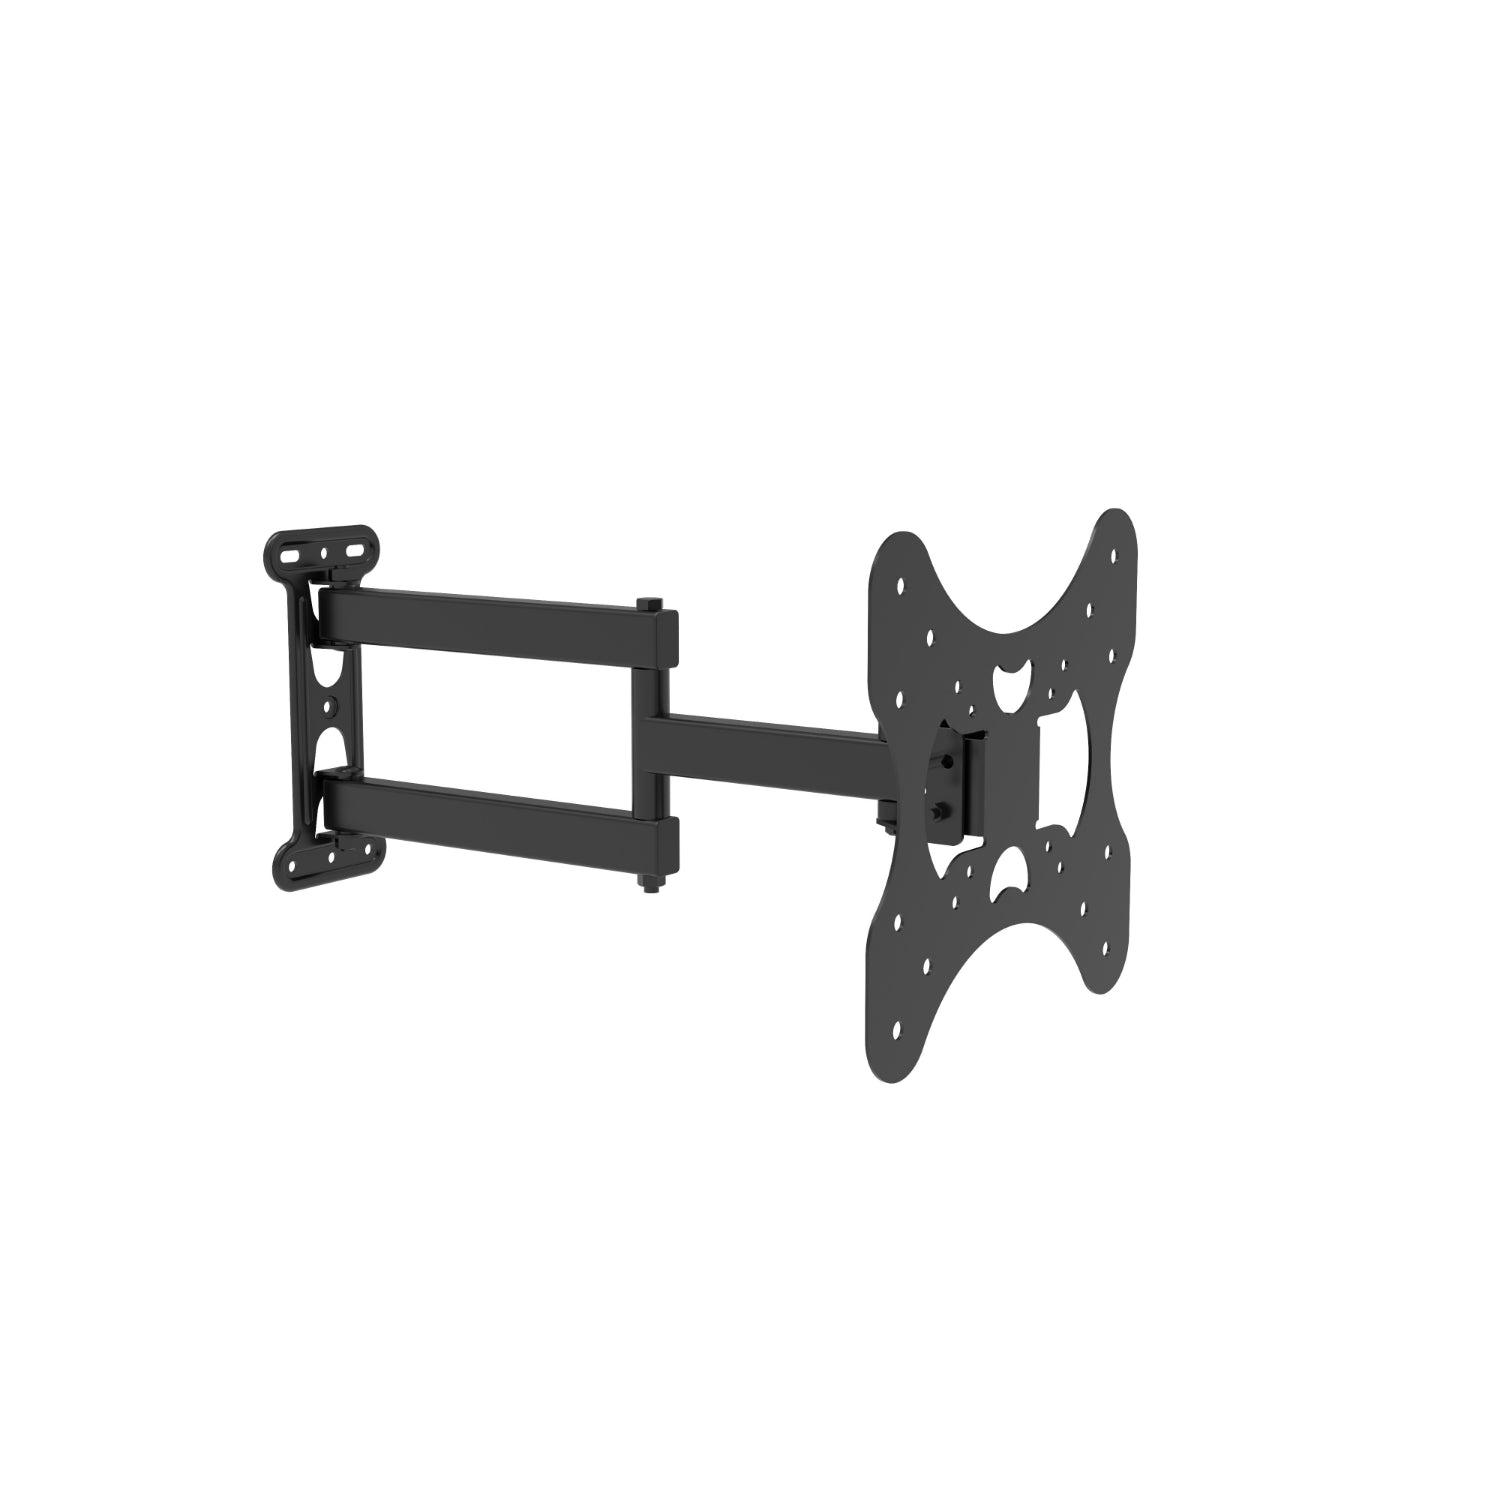 ViscoLogic Clamp Full Motion TV Wall Mount 17" to 37" Swivel Arm